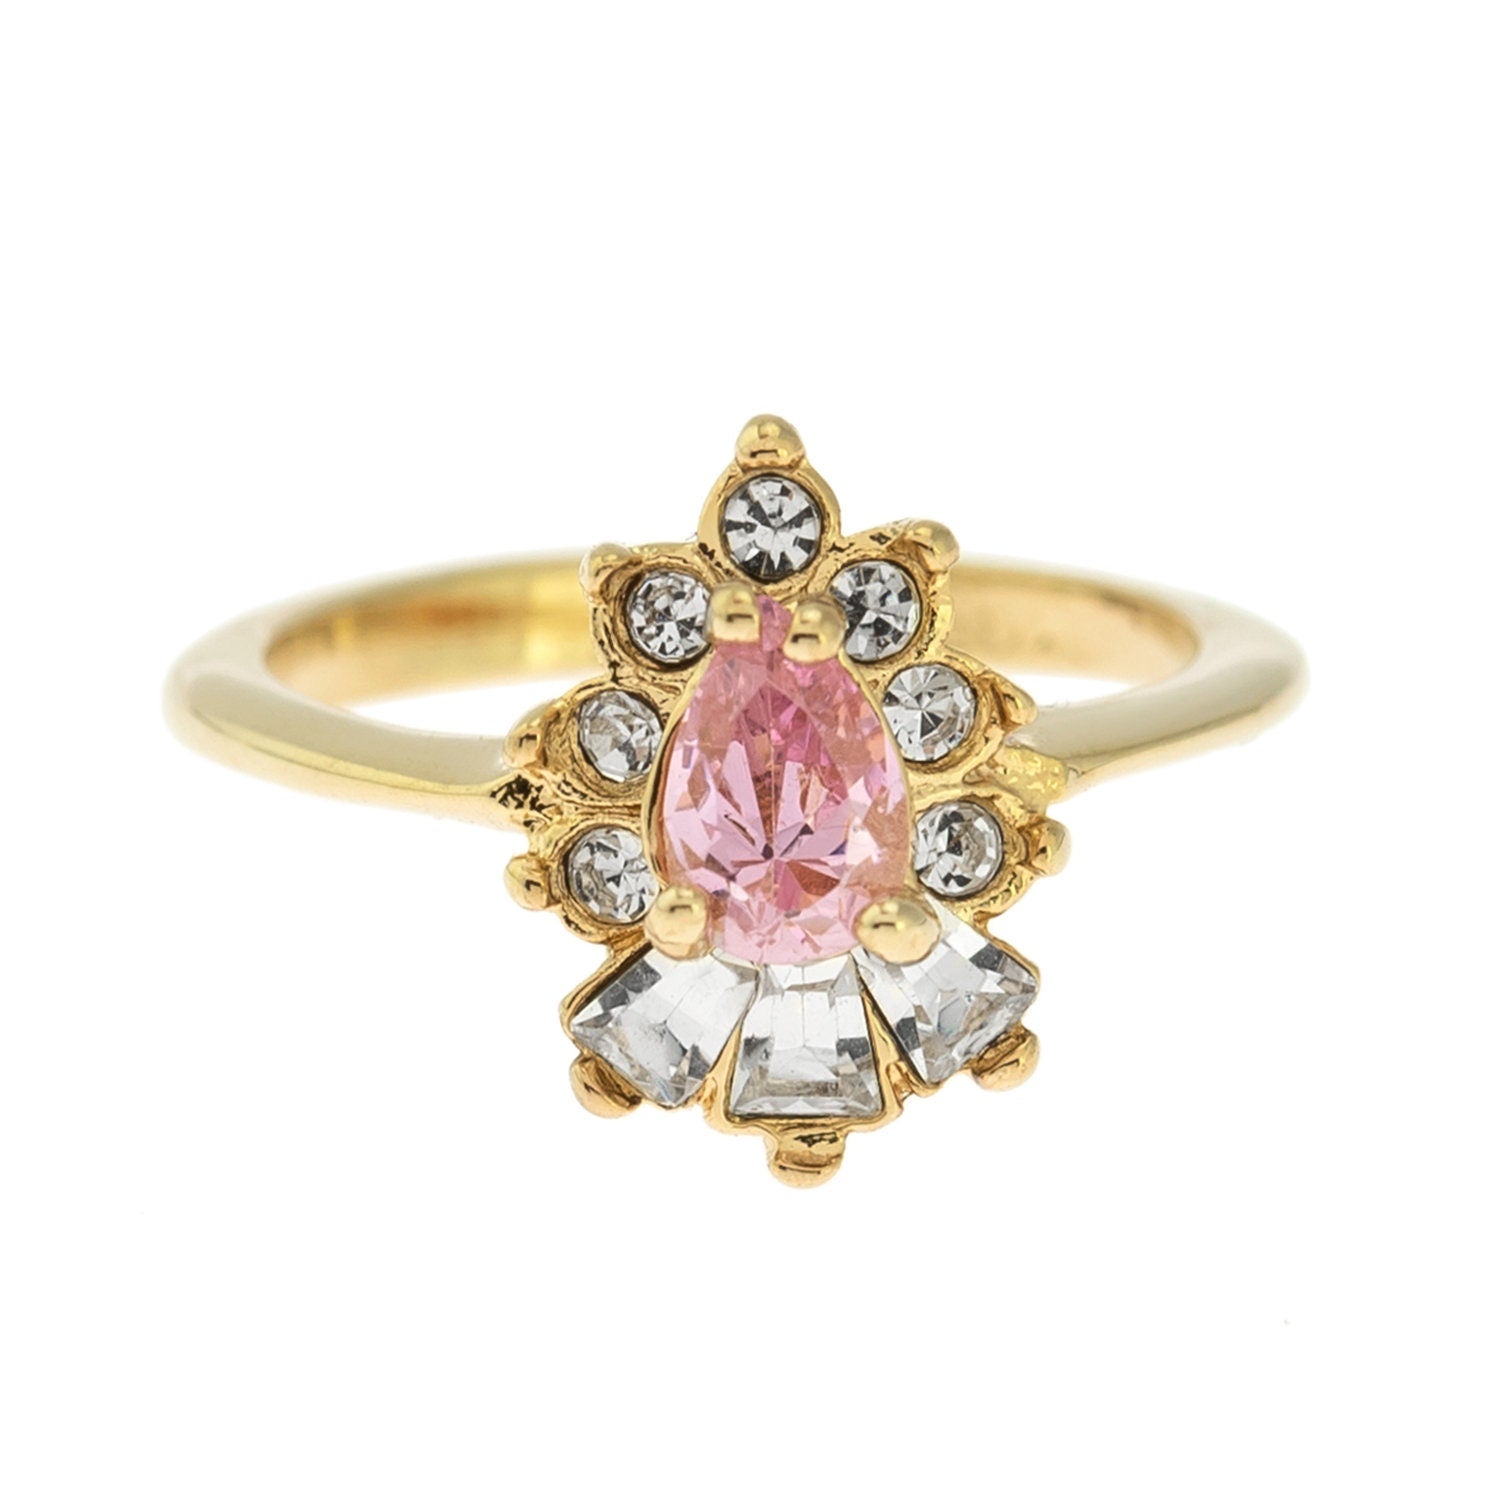 Vintage Ring 1990's Pink Tourmaline Cubic Zirconia and Clear Swarovski Crystals 18k Gold Plated Ring R3093